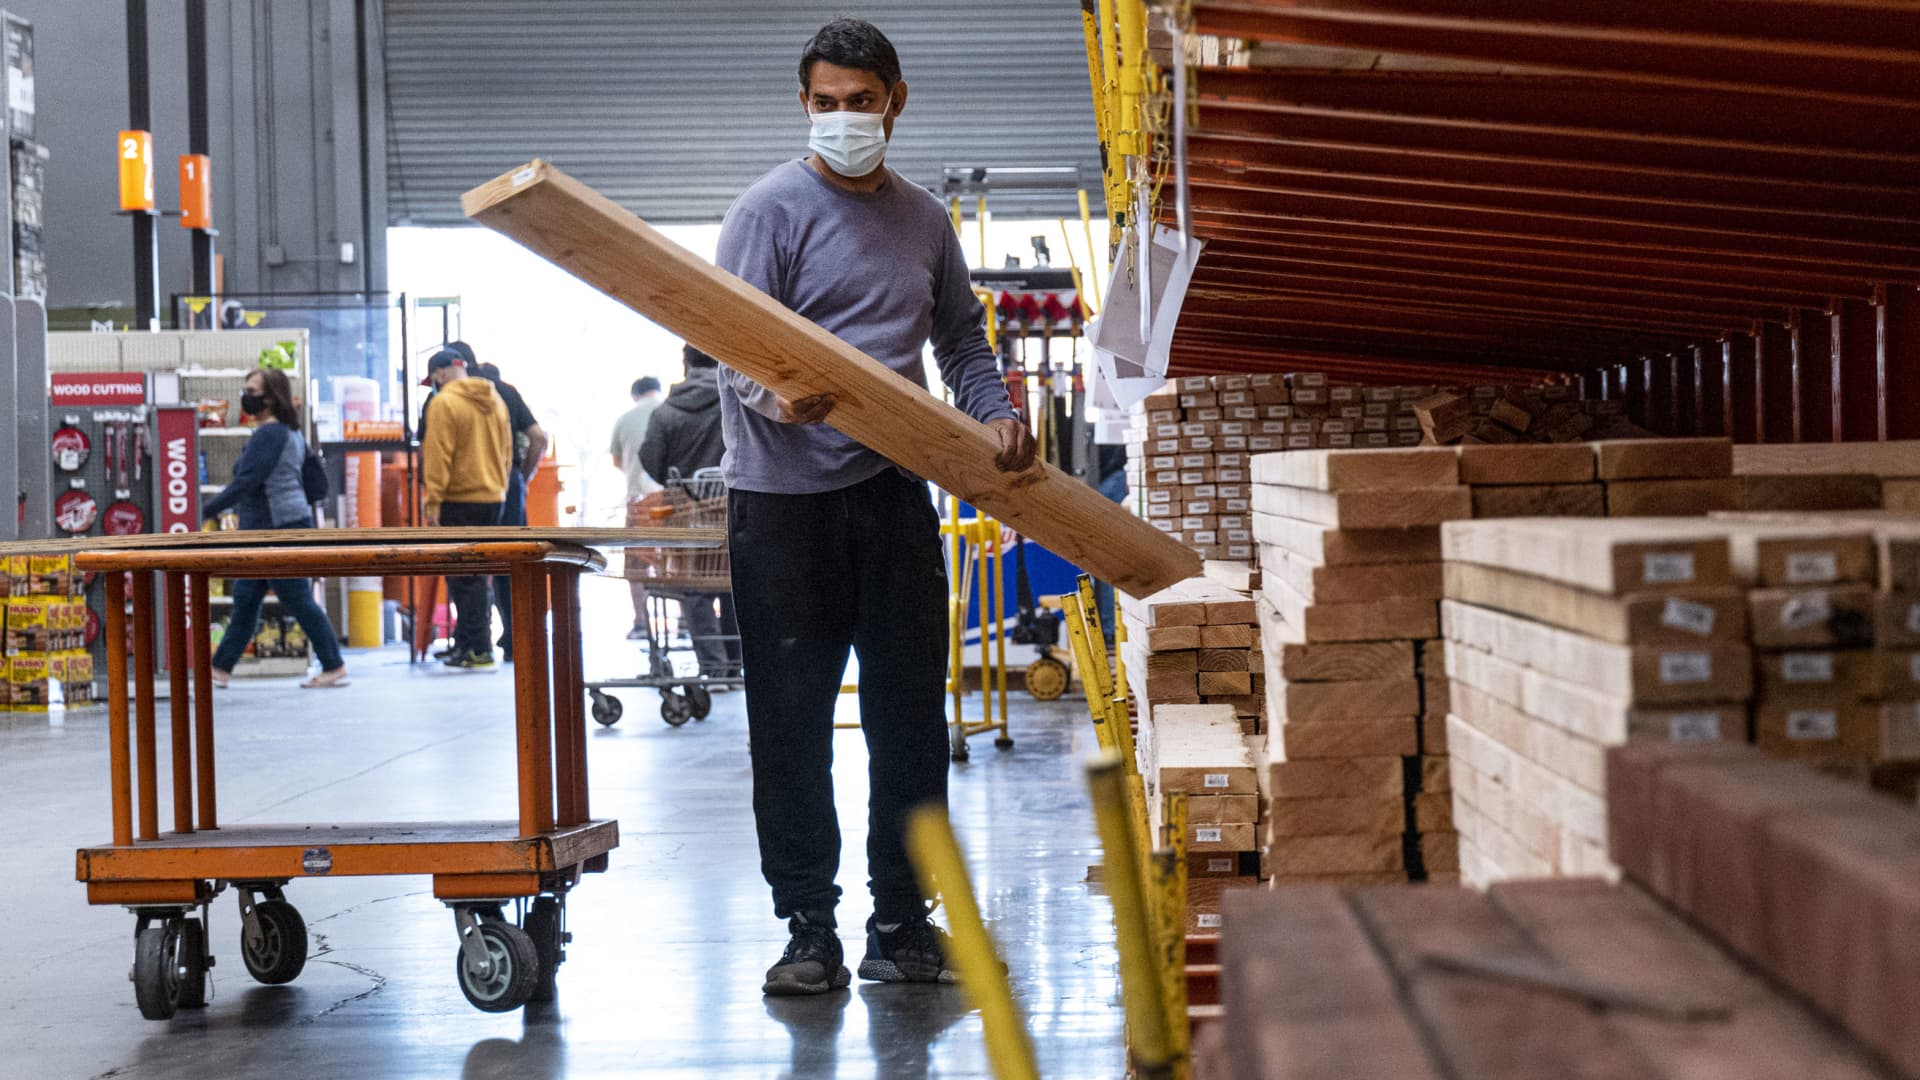 A customer wearing a protective mask loads lumber at a Home Depot store in Pleasanton, California, Feb. 22, 2021.